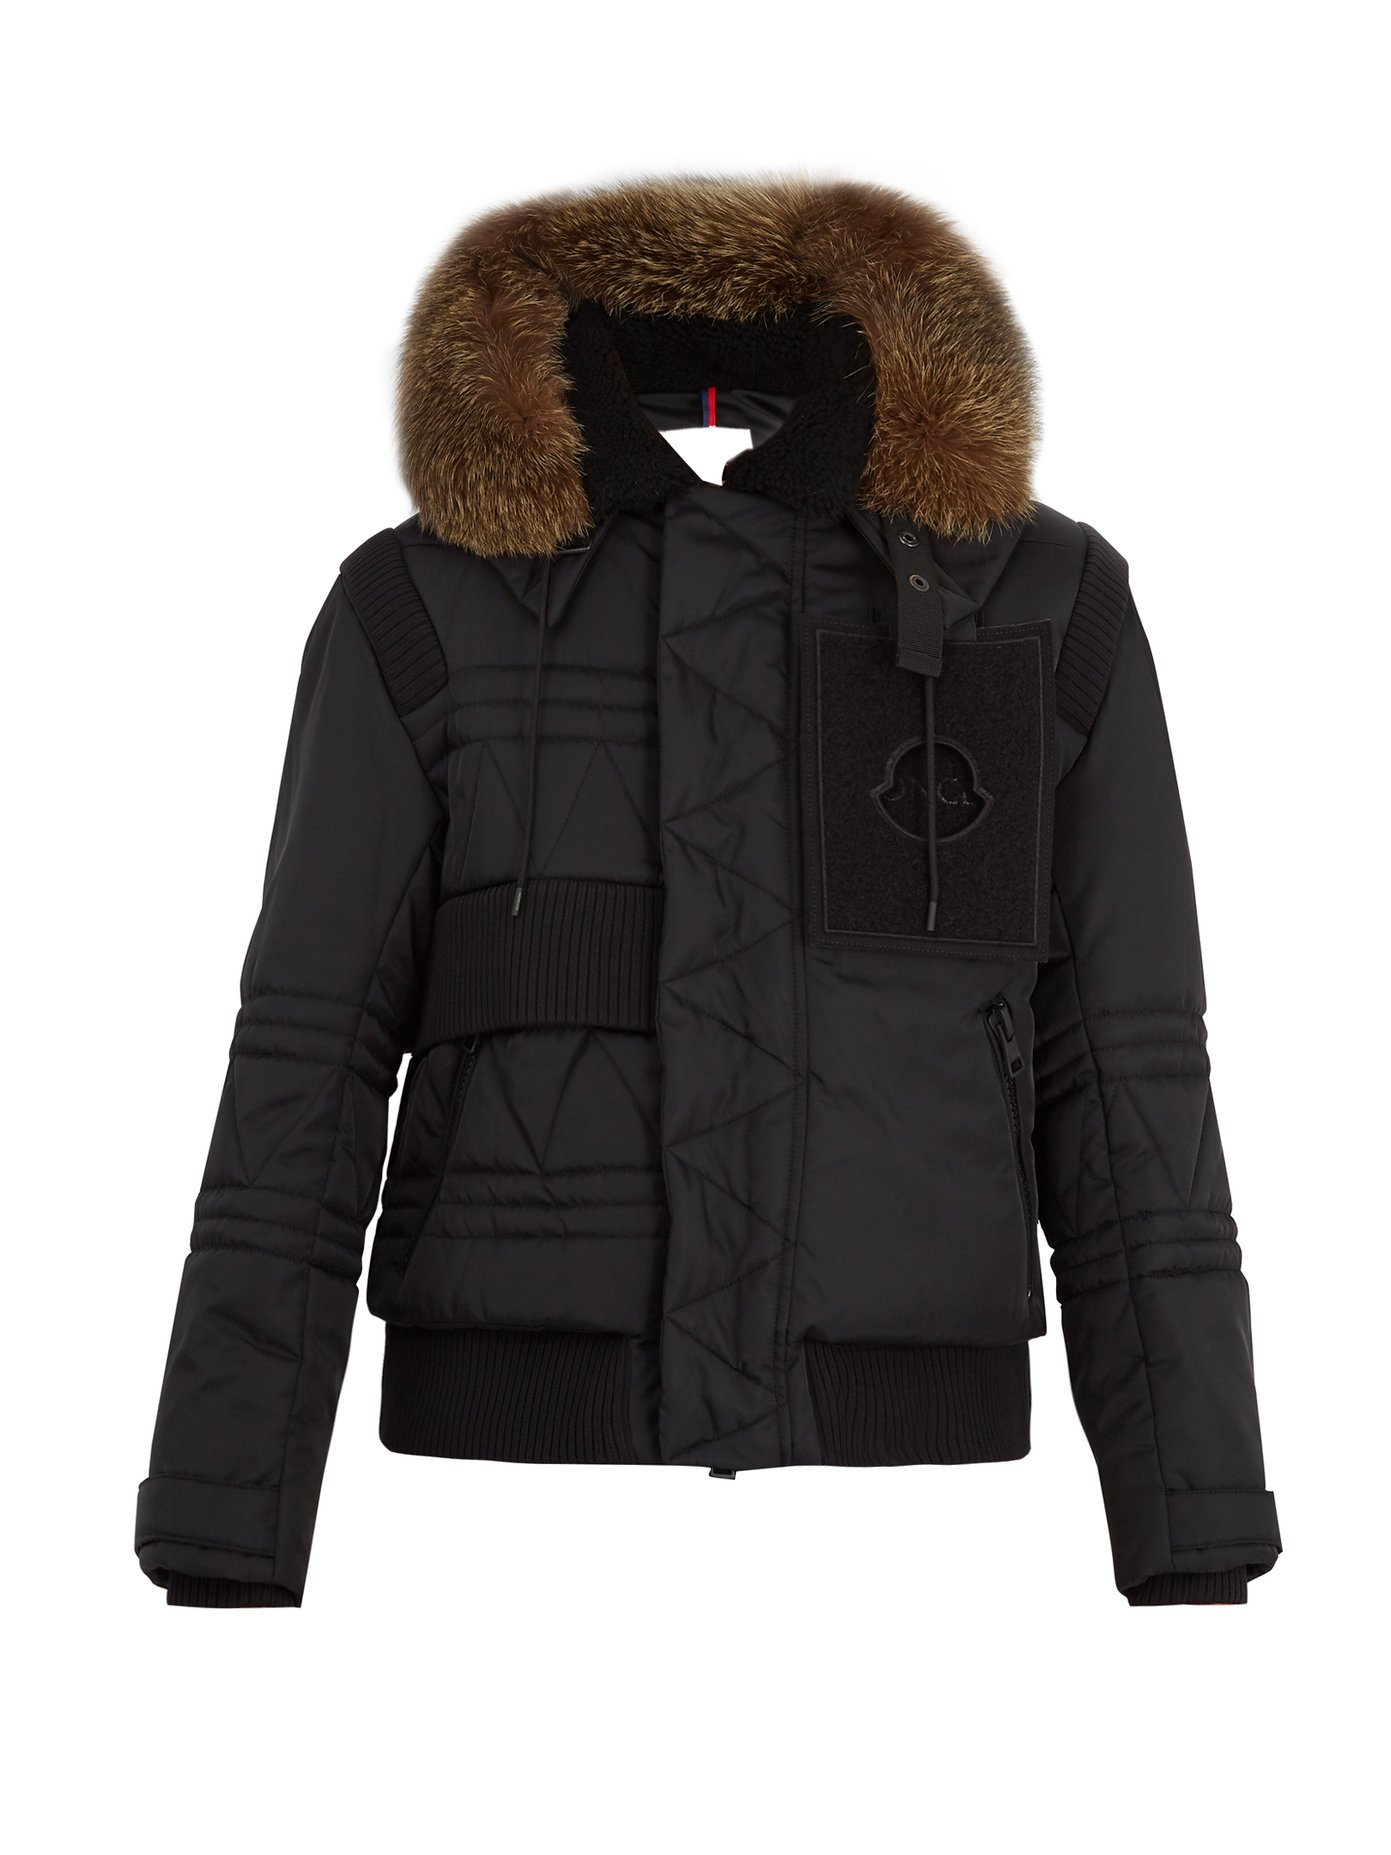 Moncler Craig Green Jacket Top Sellers, 52% OFF | www ...